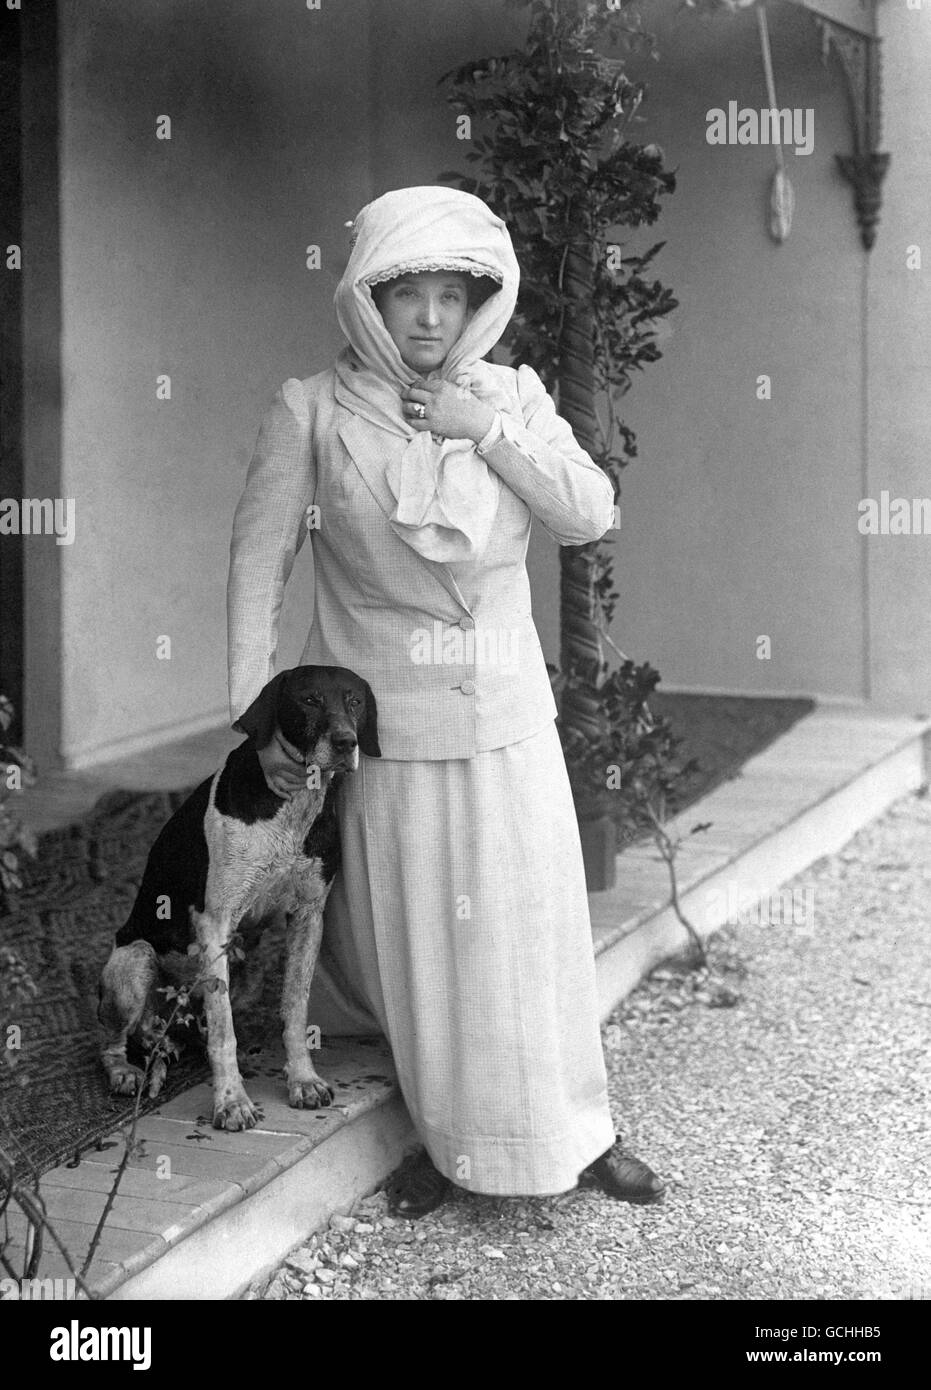 DAME NELLIE MELBA, THE OPERA SINGER, WITH HER PET DOG IN 1913. Stock Photo